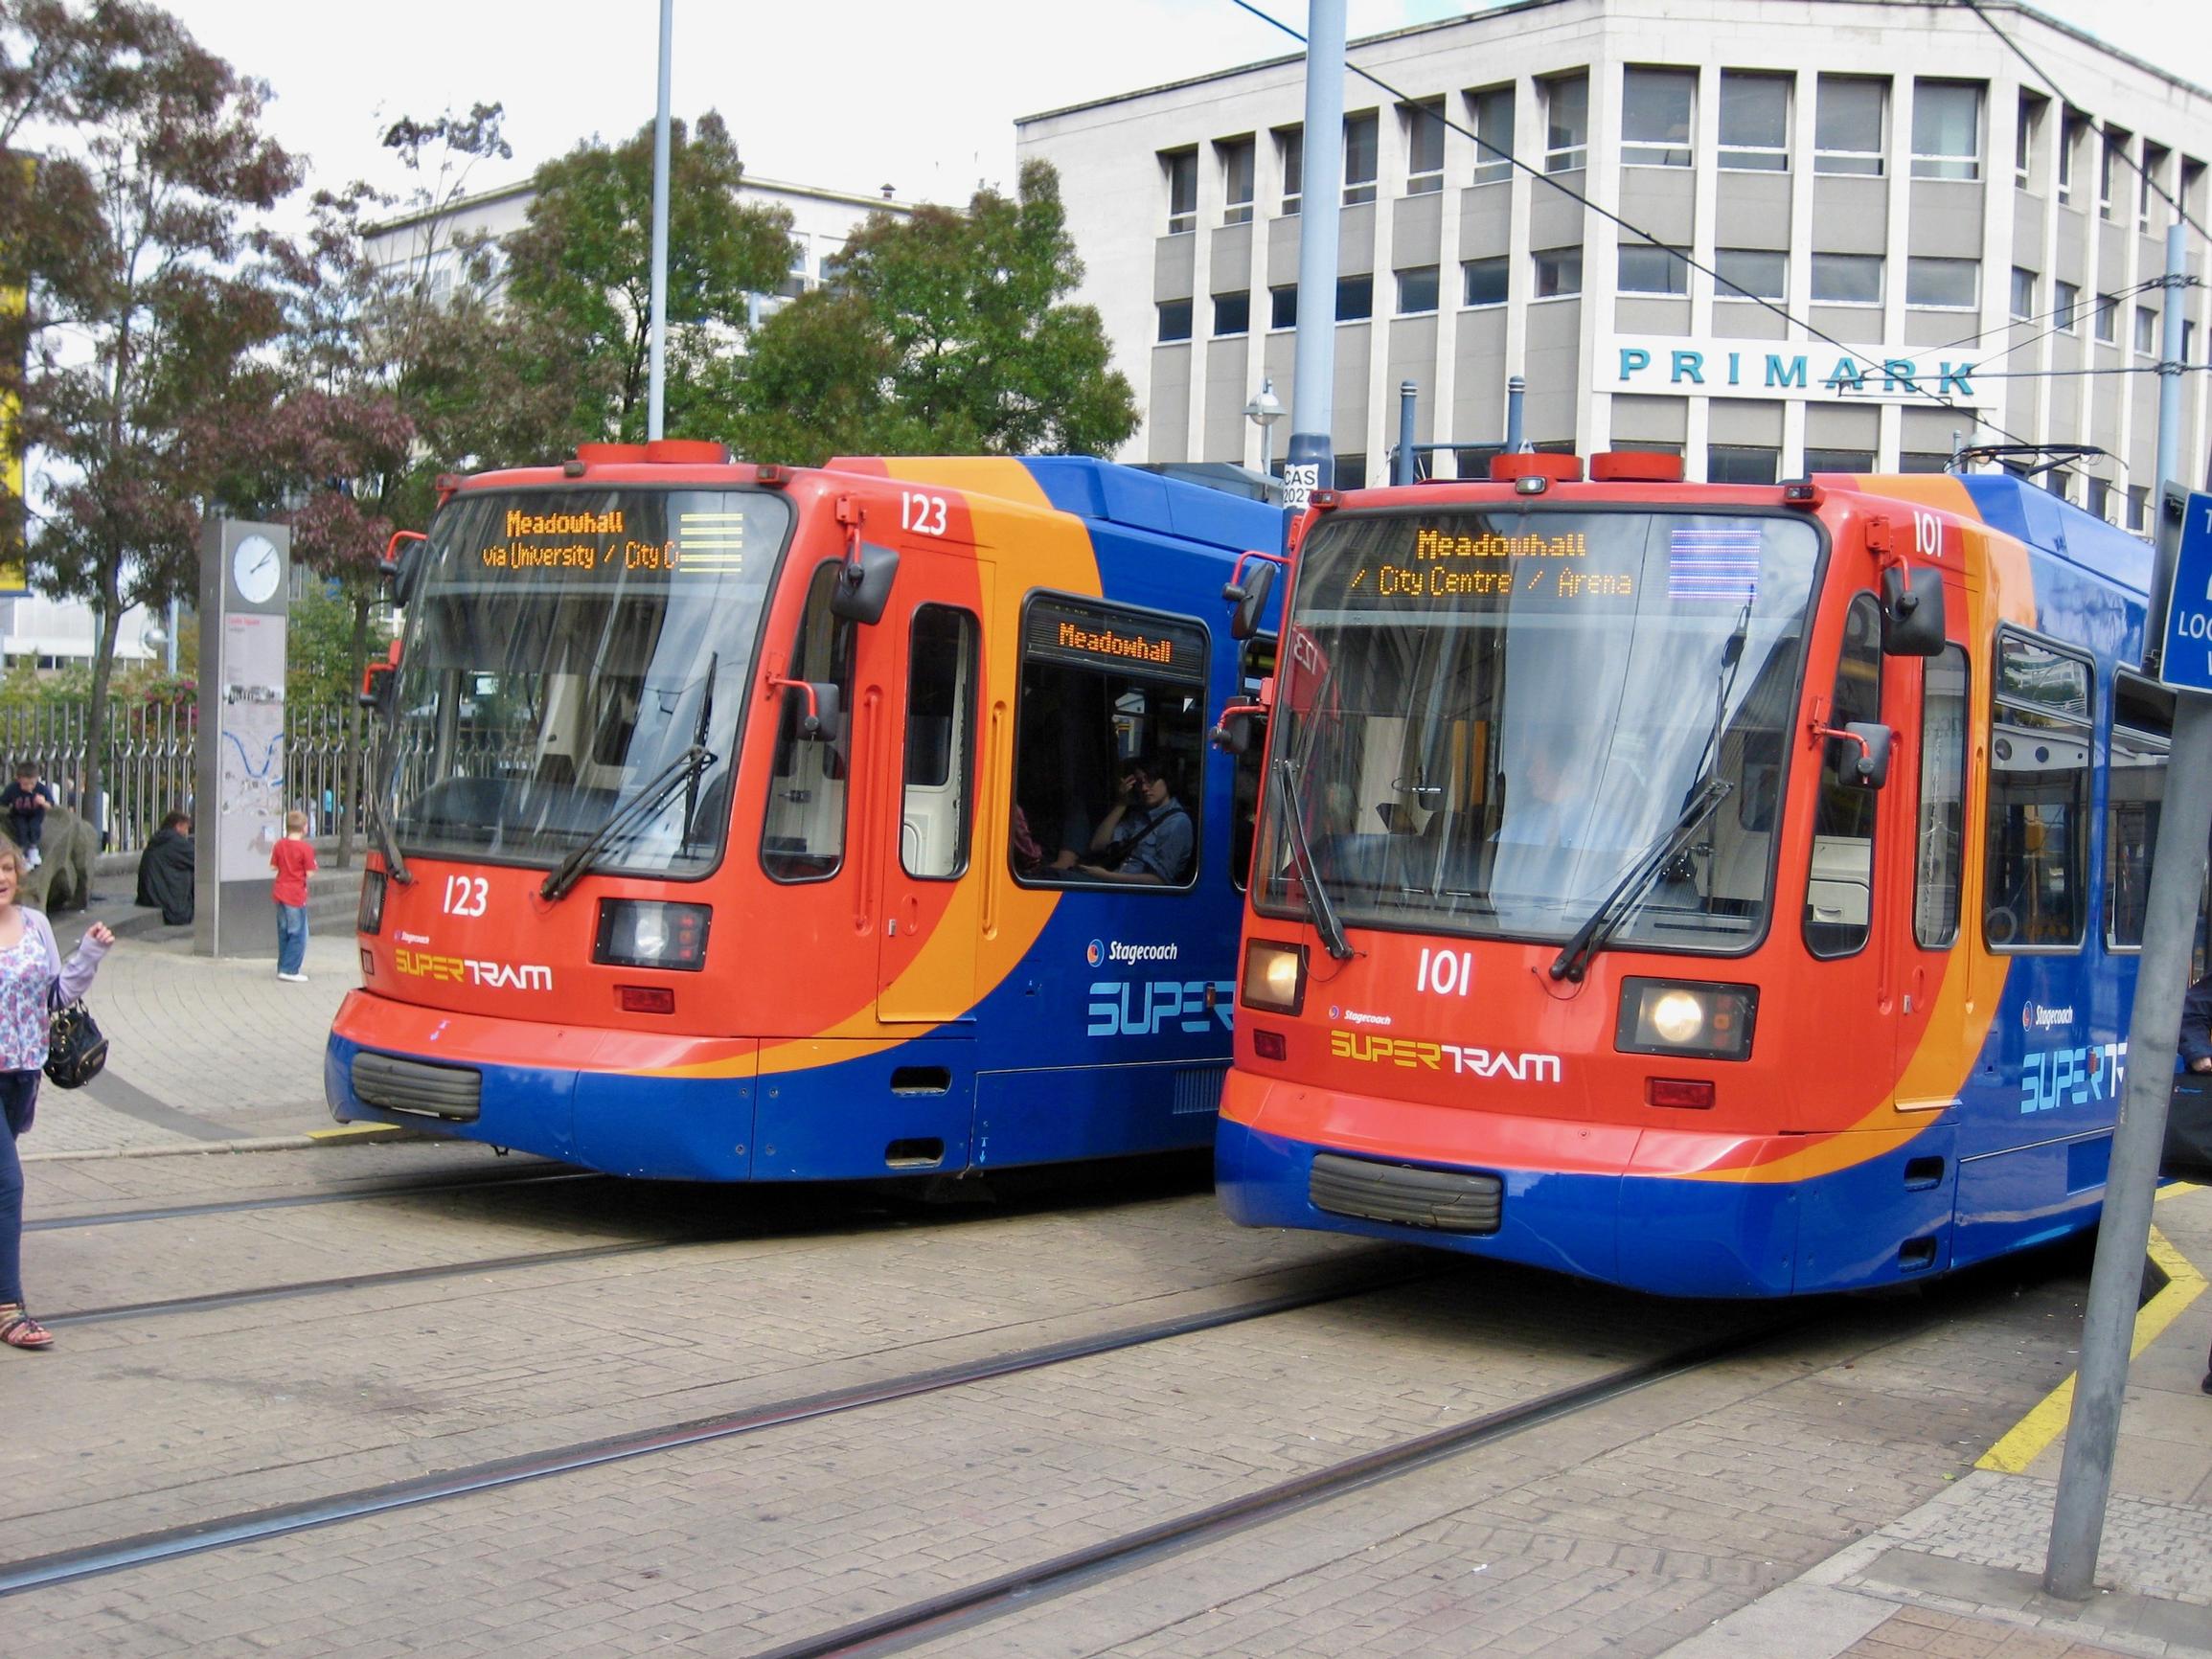 Stagecoach’s contract for the tram ends in 2024